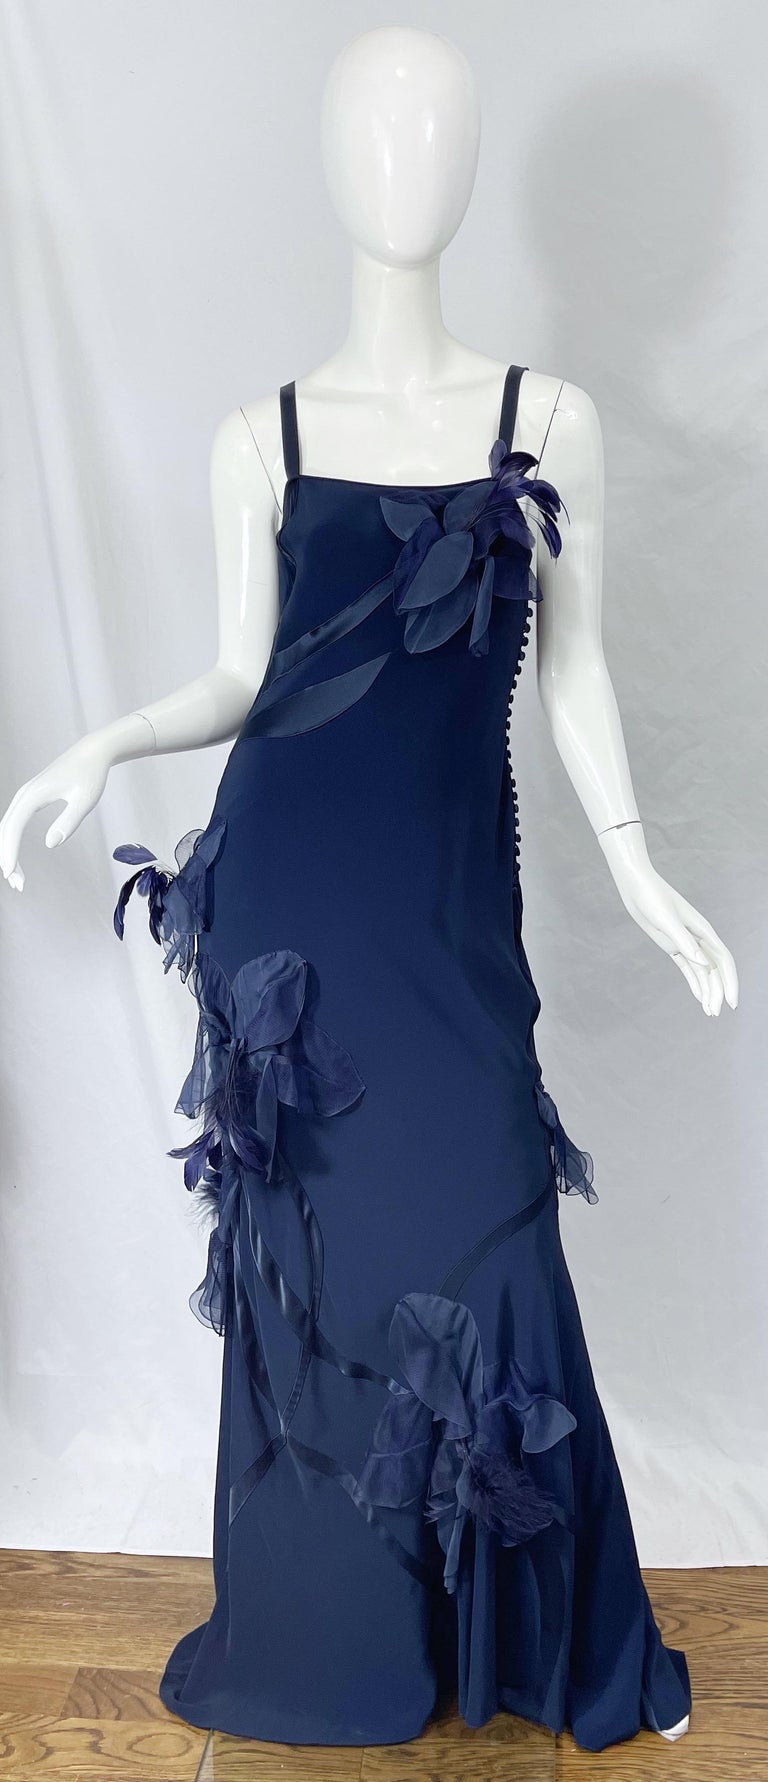 Beautiful never worn ( with original store tags still attached ) early 2000s JOHN GALLIANO navy blue silk crepe and satin feather encrusted sleeveless evening gown ! Elegant fabric buttons up the side. Satin panels throughout with netting and